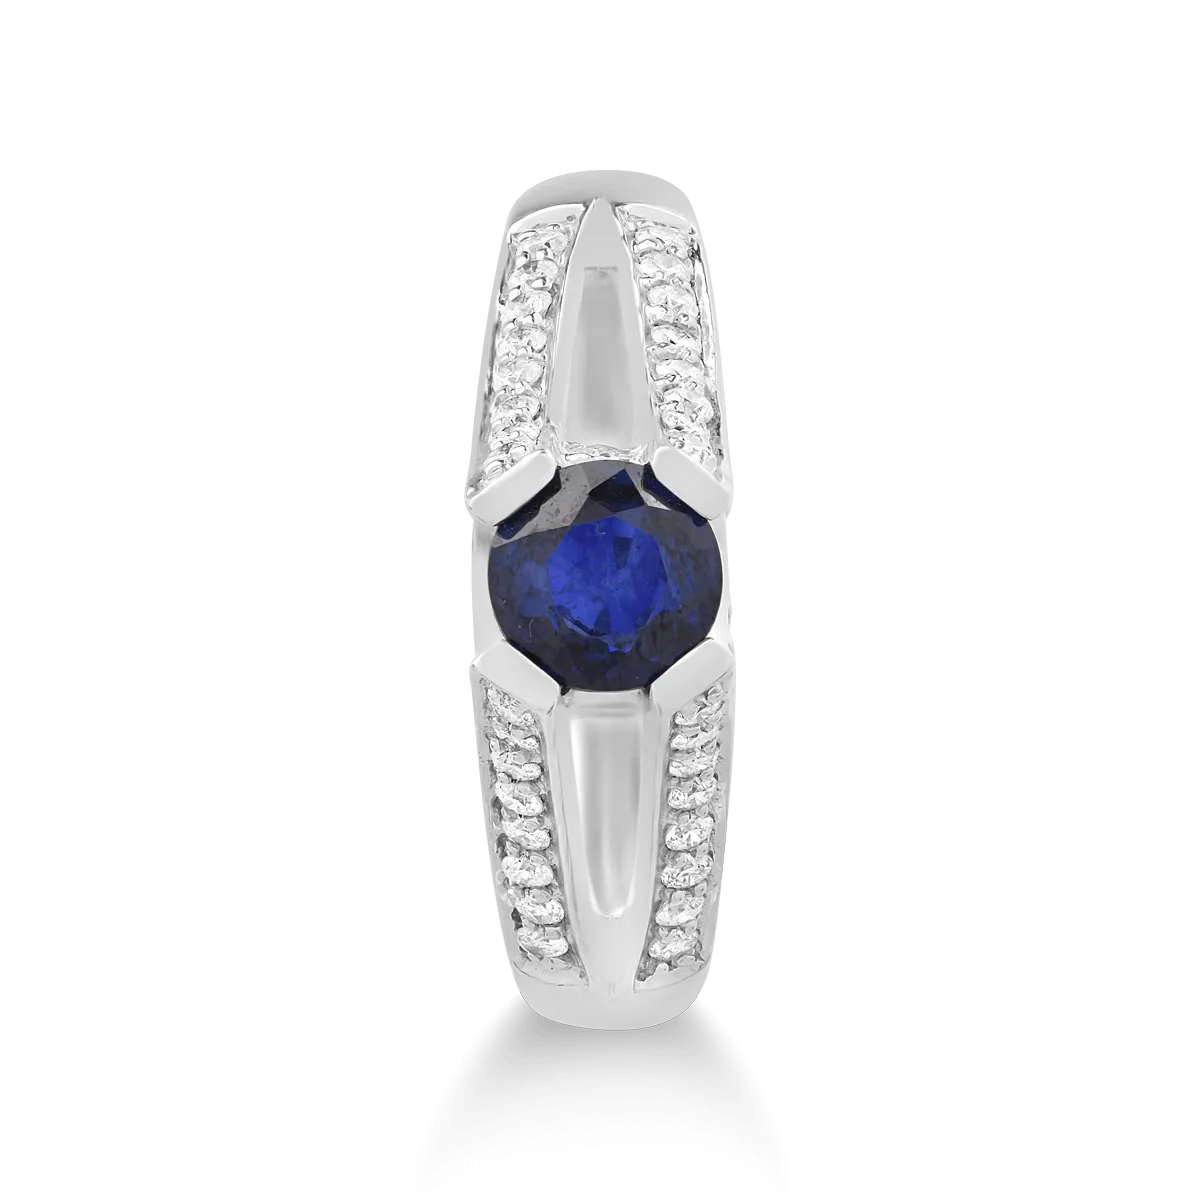 14K white gold ring with 0.71ct treated sapphire and 0.51ct diamonds